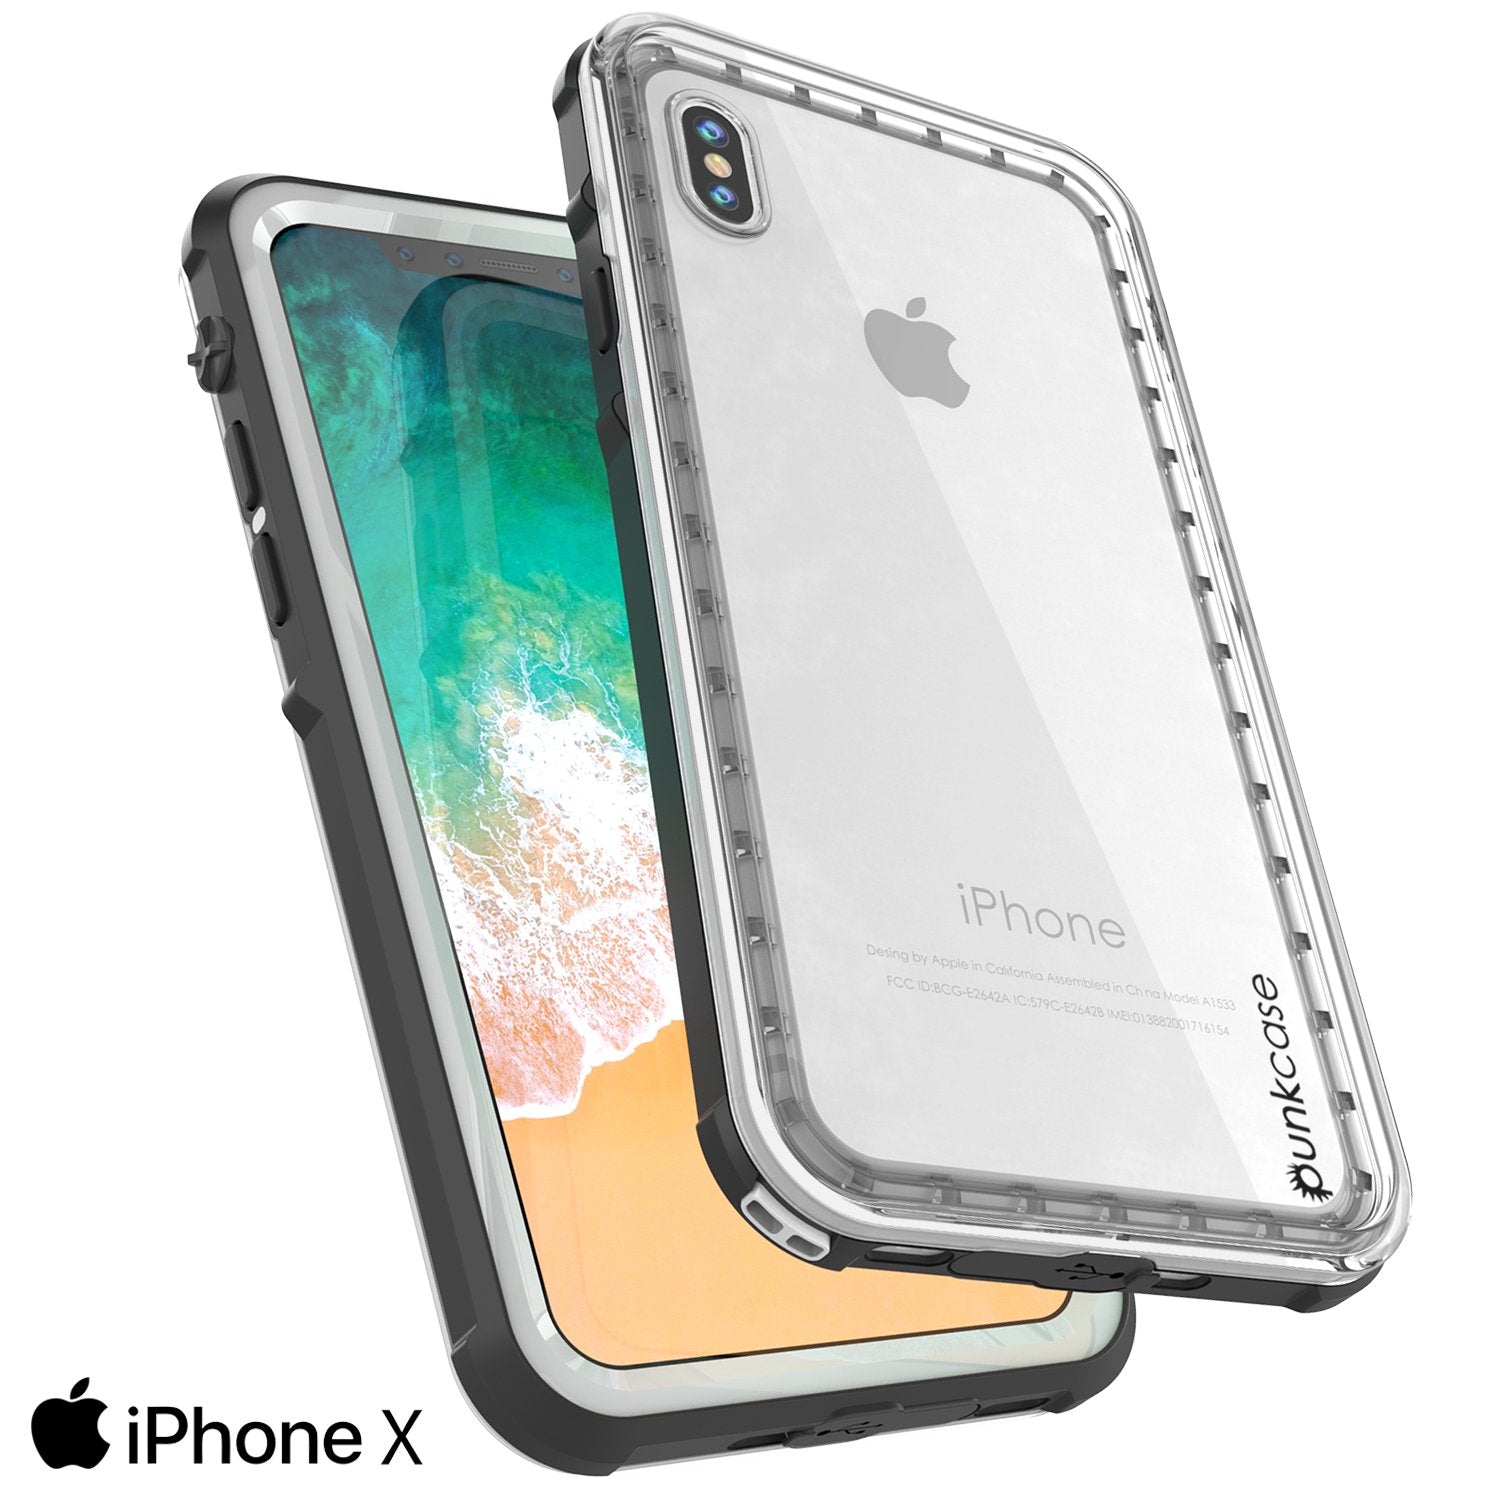 iPhone X Case, PUNKCase [CRYSTAL SERIES] Protective IP68 Certified Cover W/ Attached Screen Protector - DustPROOF, ShockPROOF, SnowPROOF - Ultra Slim Fit for Apple iPhone 10 [WHITE]